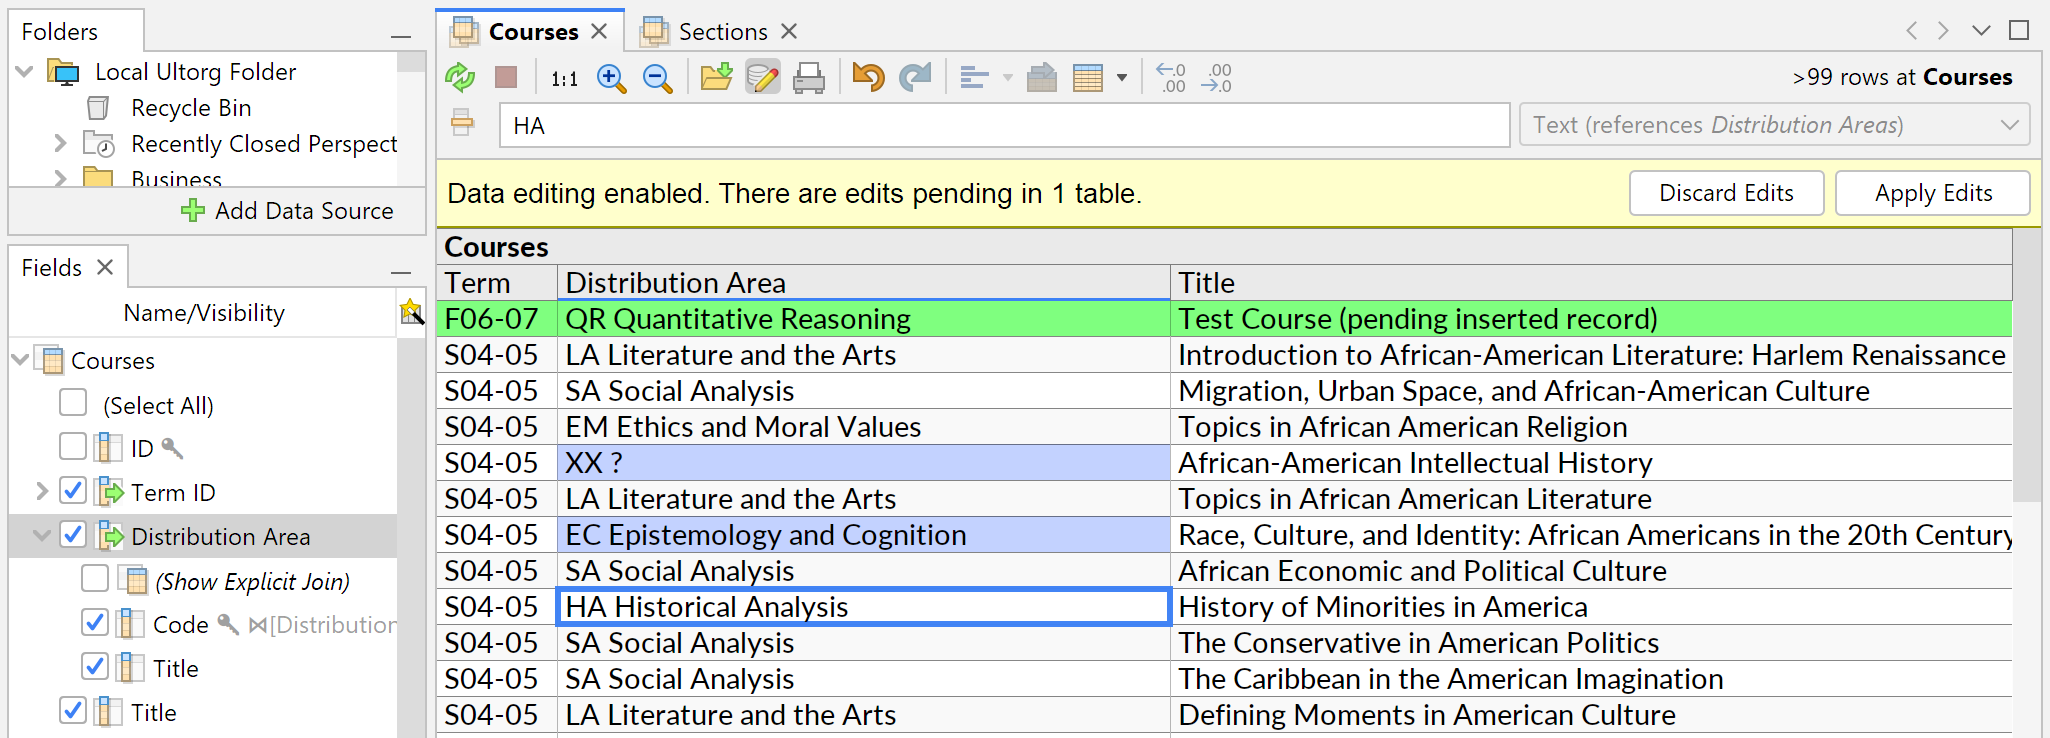 Screenshot showing reference edits in fields shown using the Compact Join format.